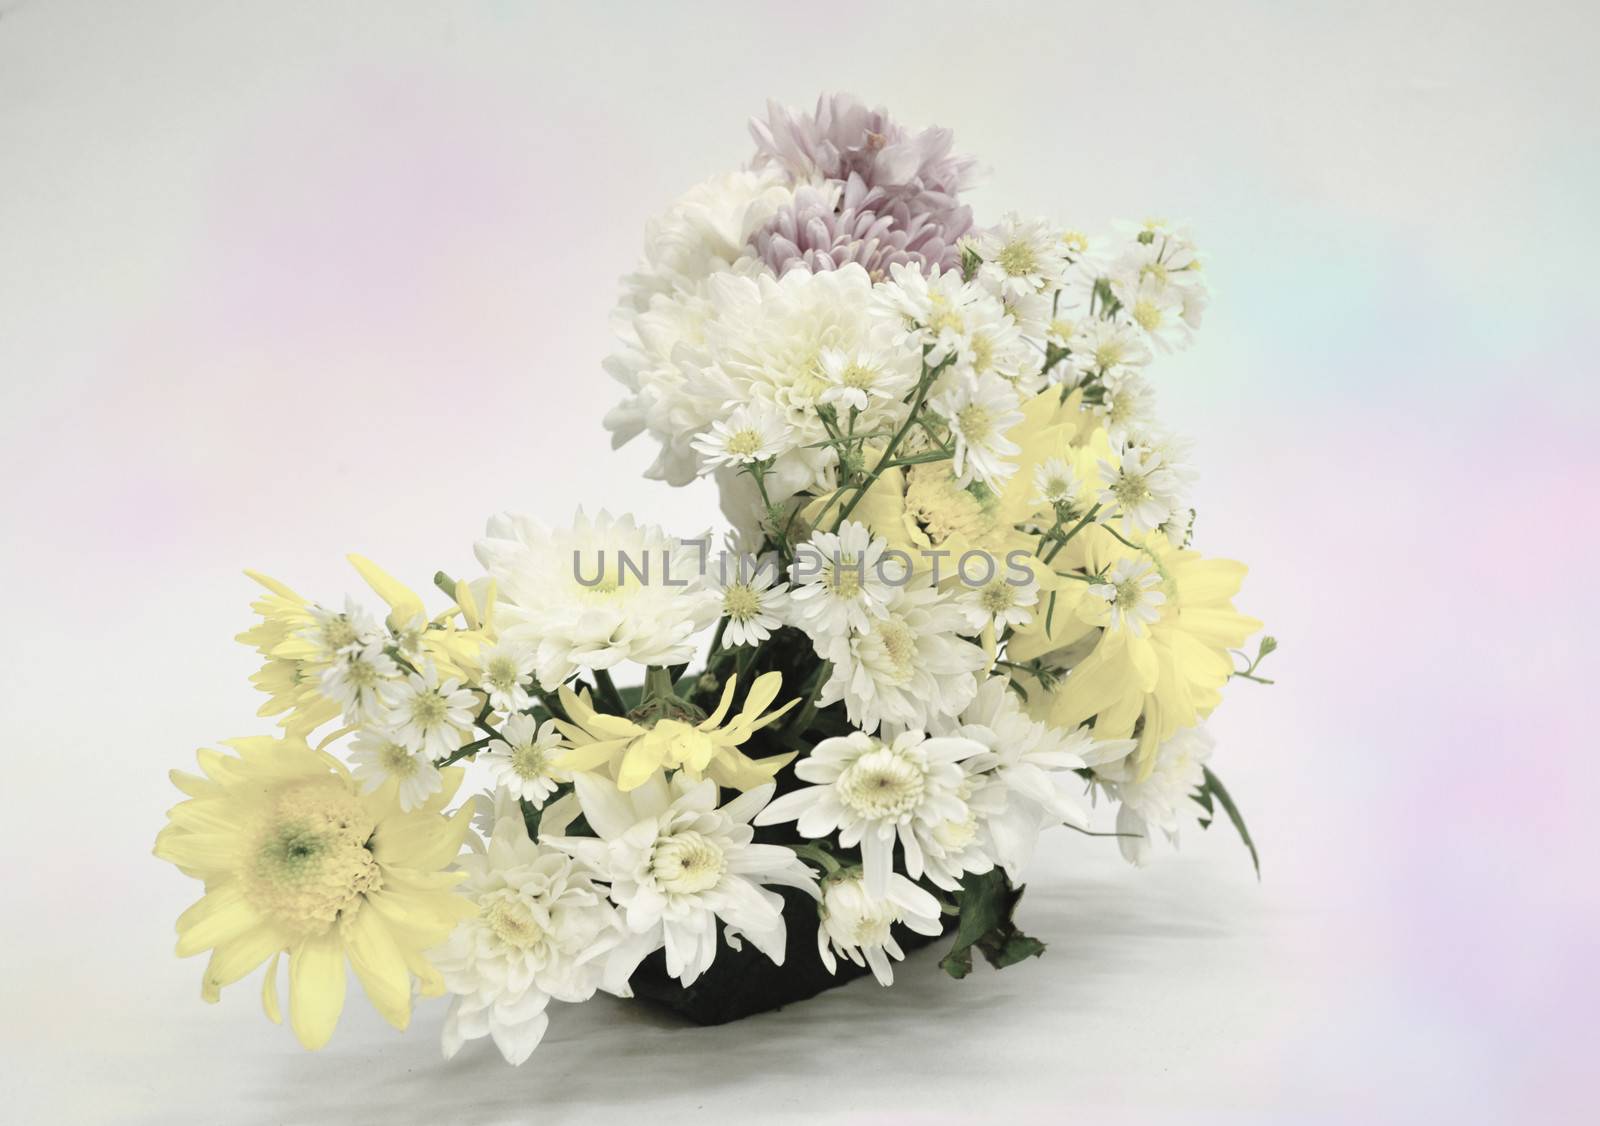 Bouquet of Flowers in a Glass on Pastel background